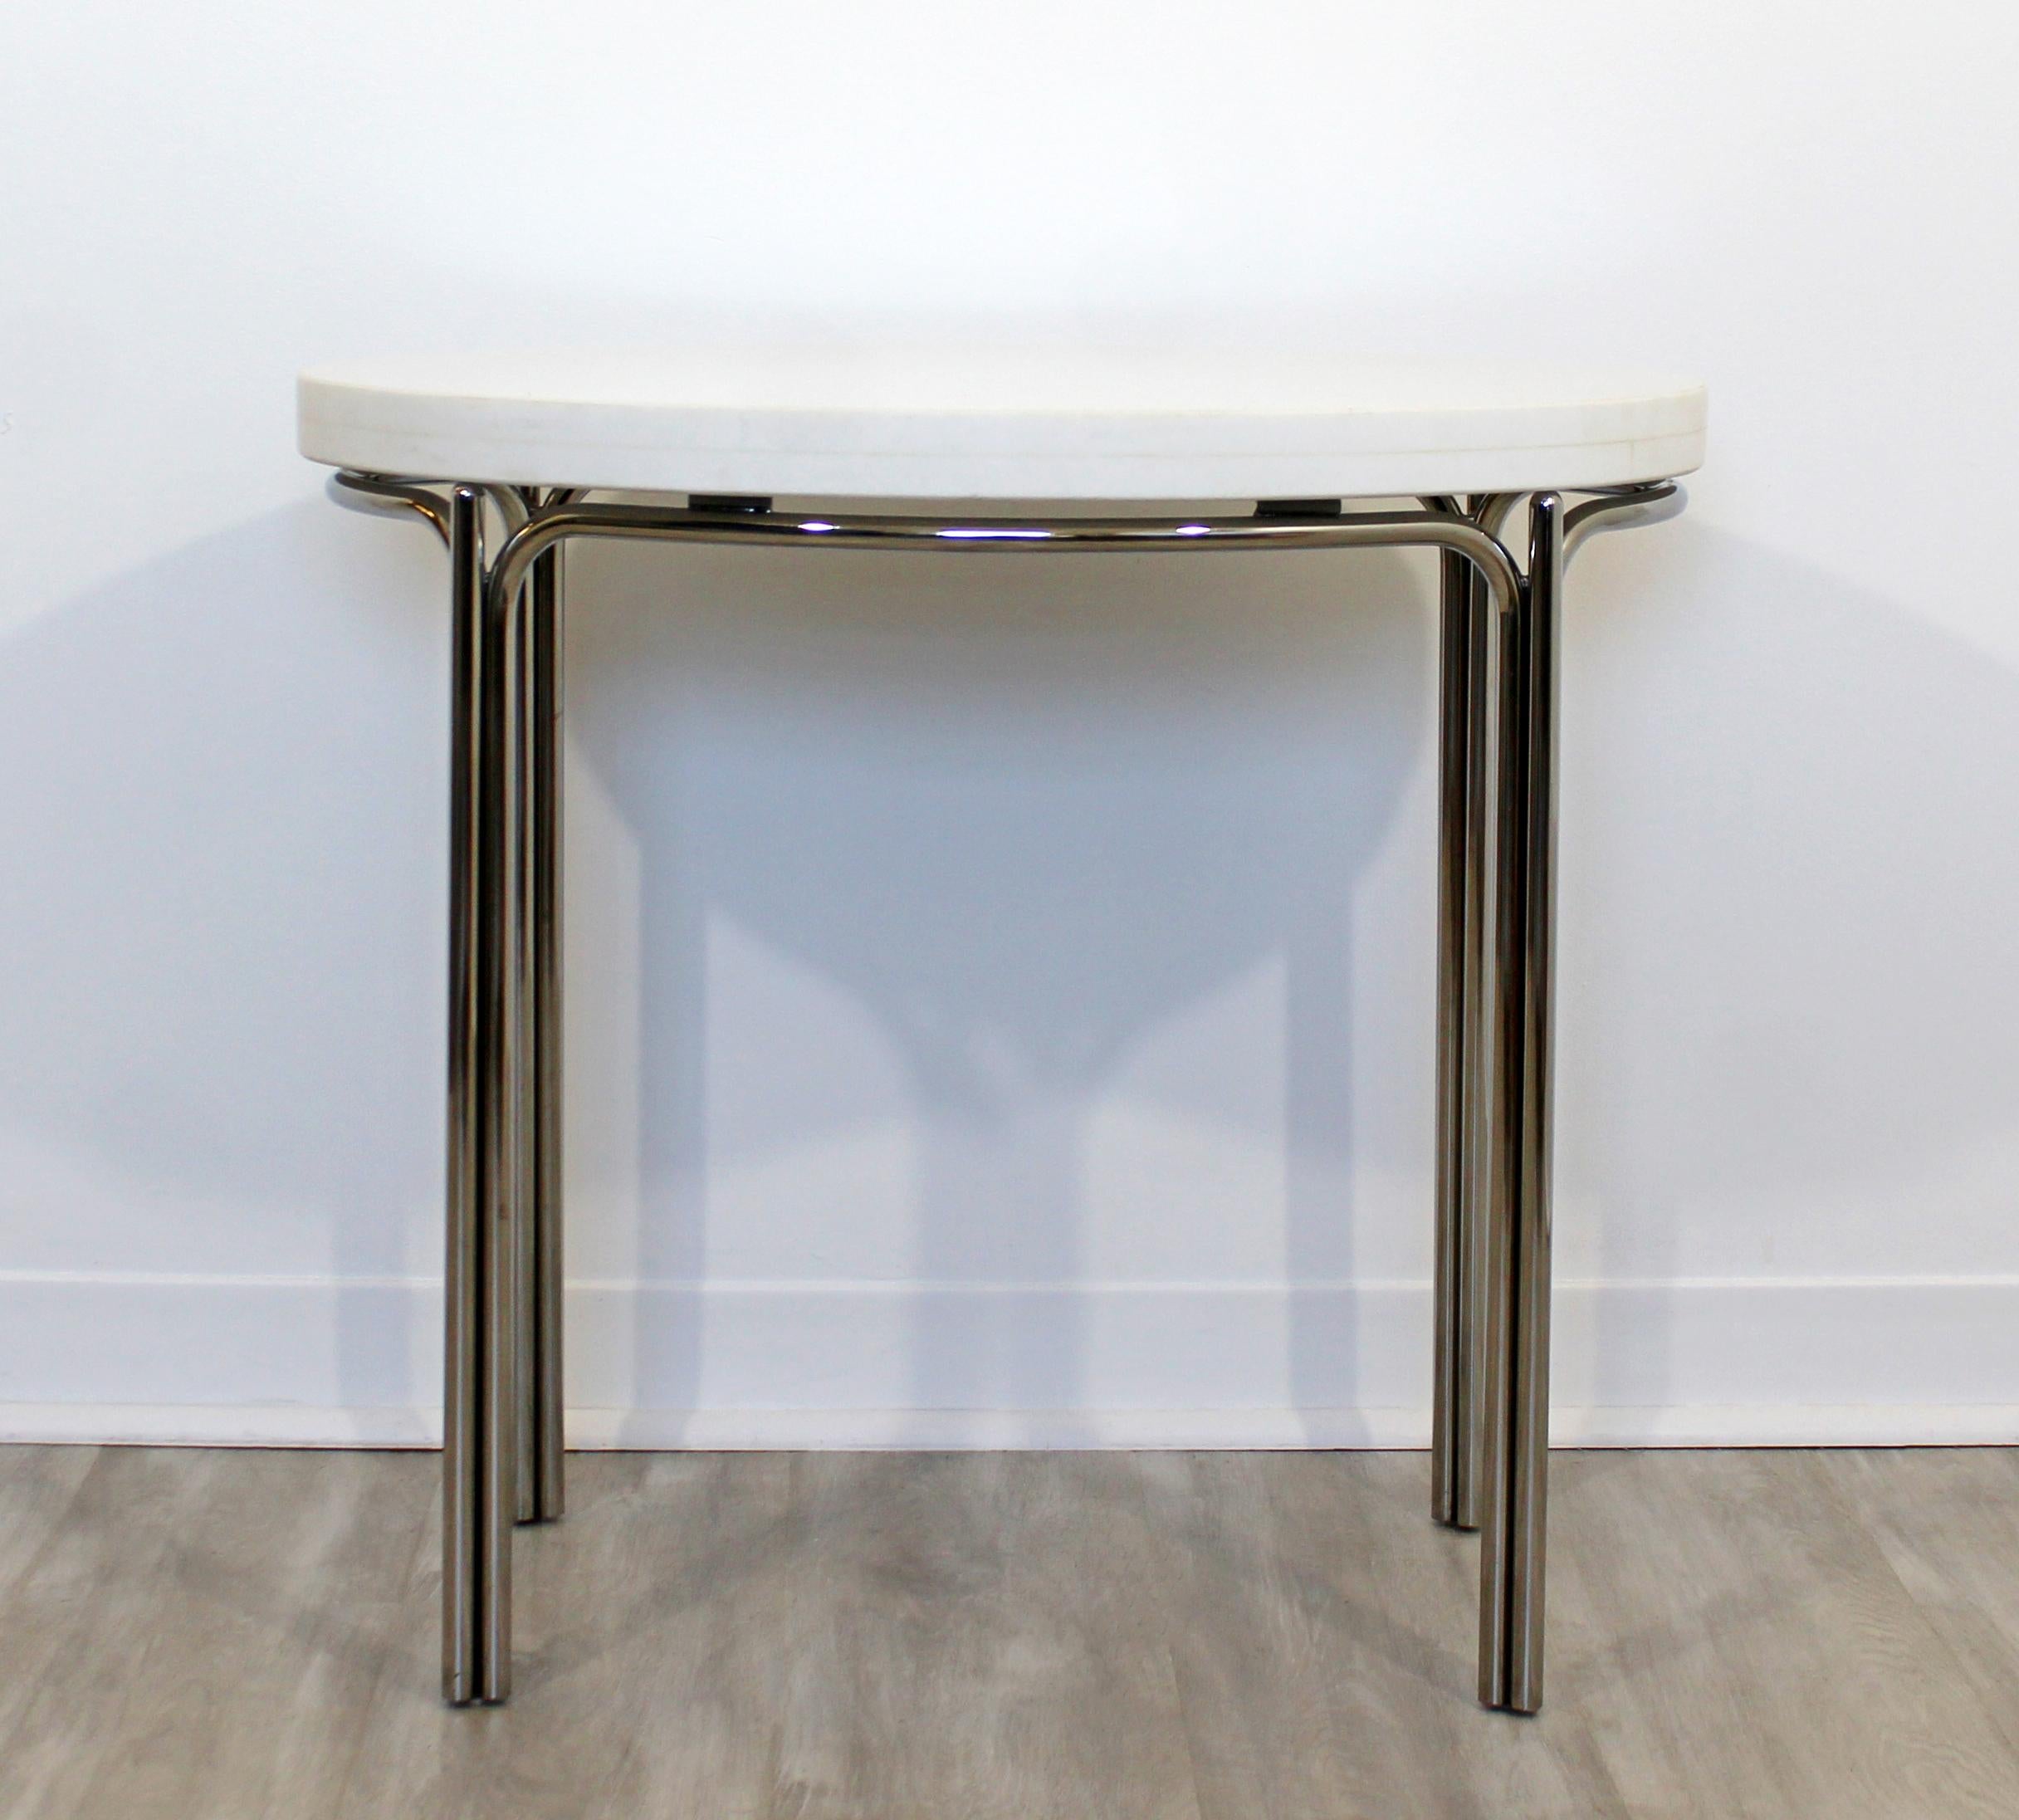 For your consideration is a simple and stunning chrome and marble side, end or accent table, circa 1970s. In excellent vintage condition. The dimensions are 27